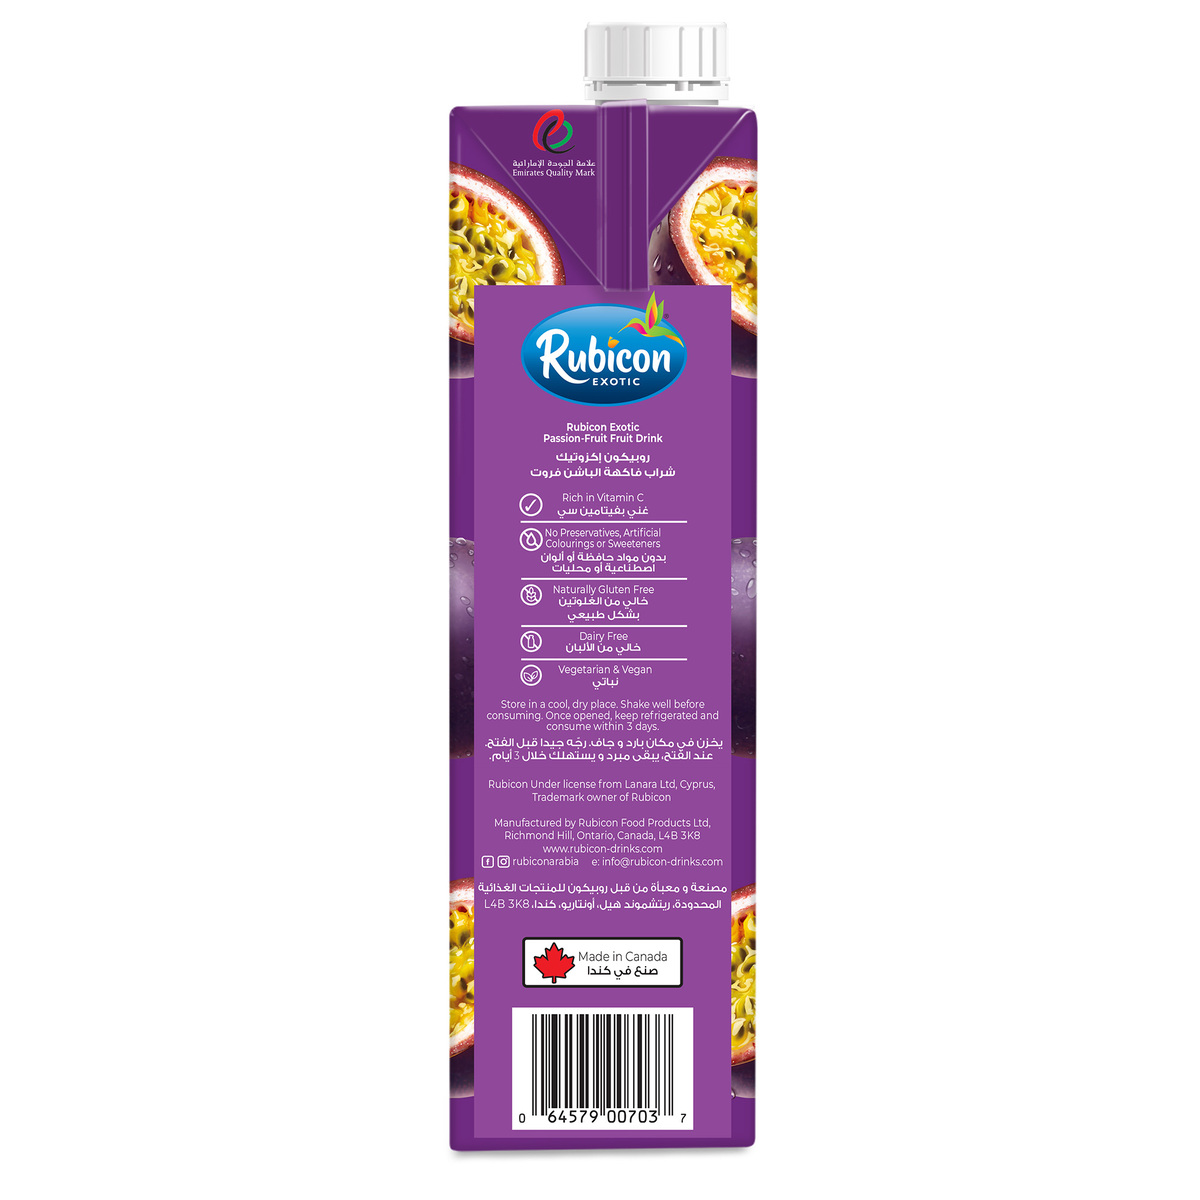 Rubicon Exotic Passion Fruit Drink 1 Litre